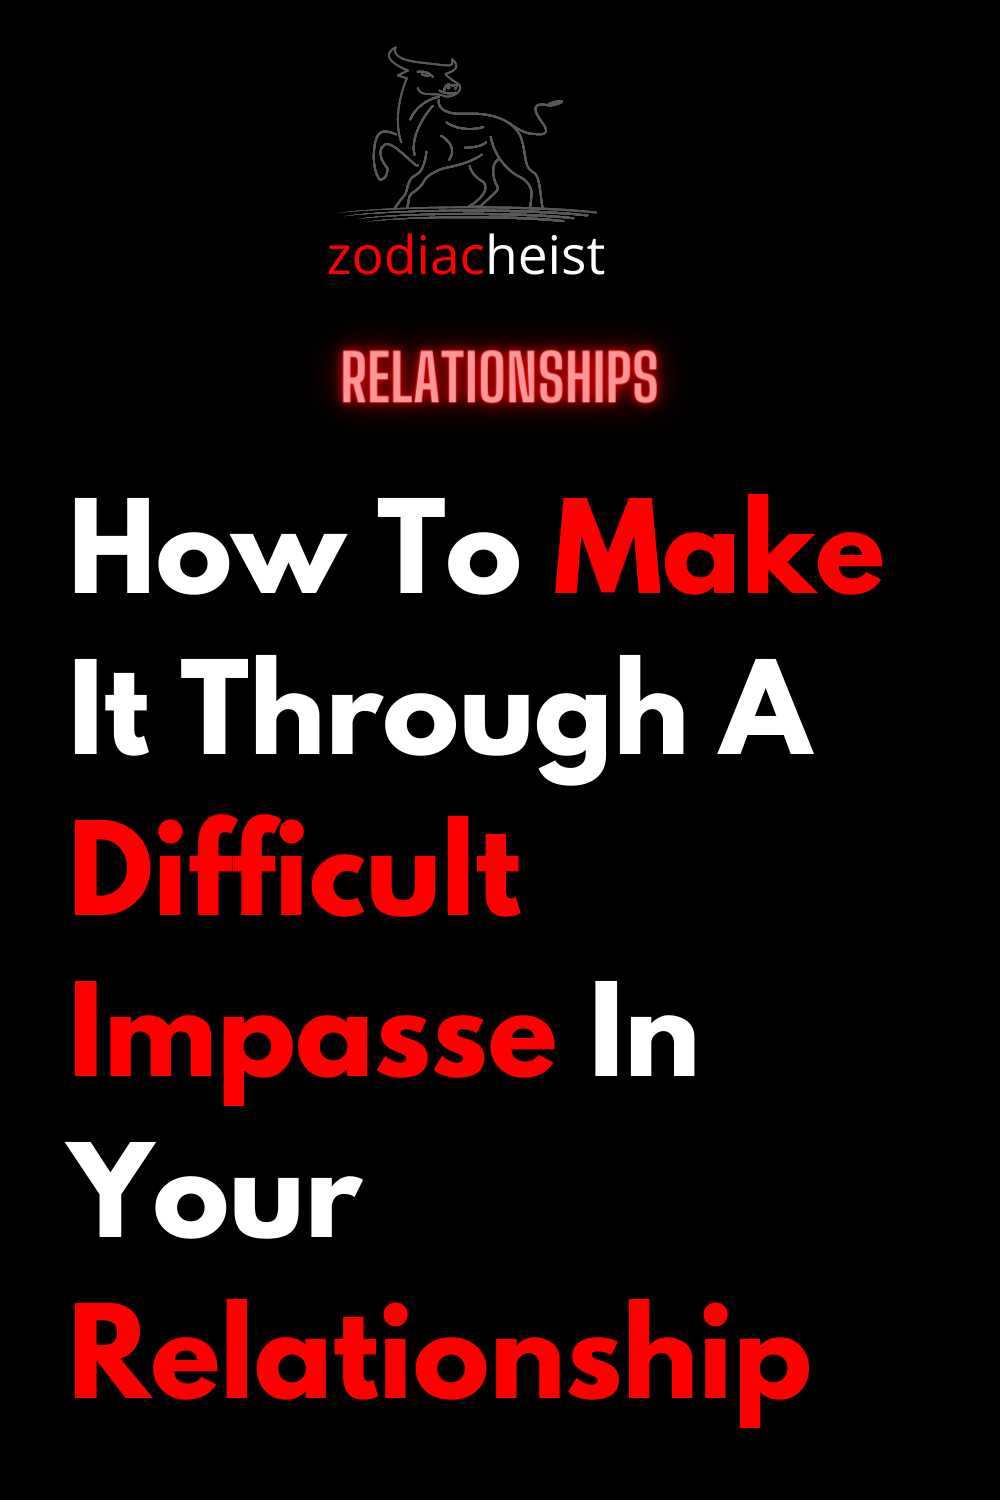 How To Make It Through A Difficult Impasse In Your Relationship